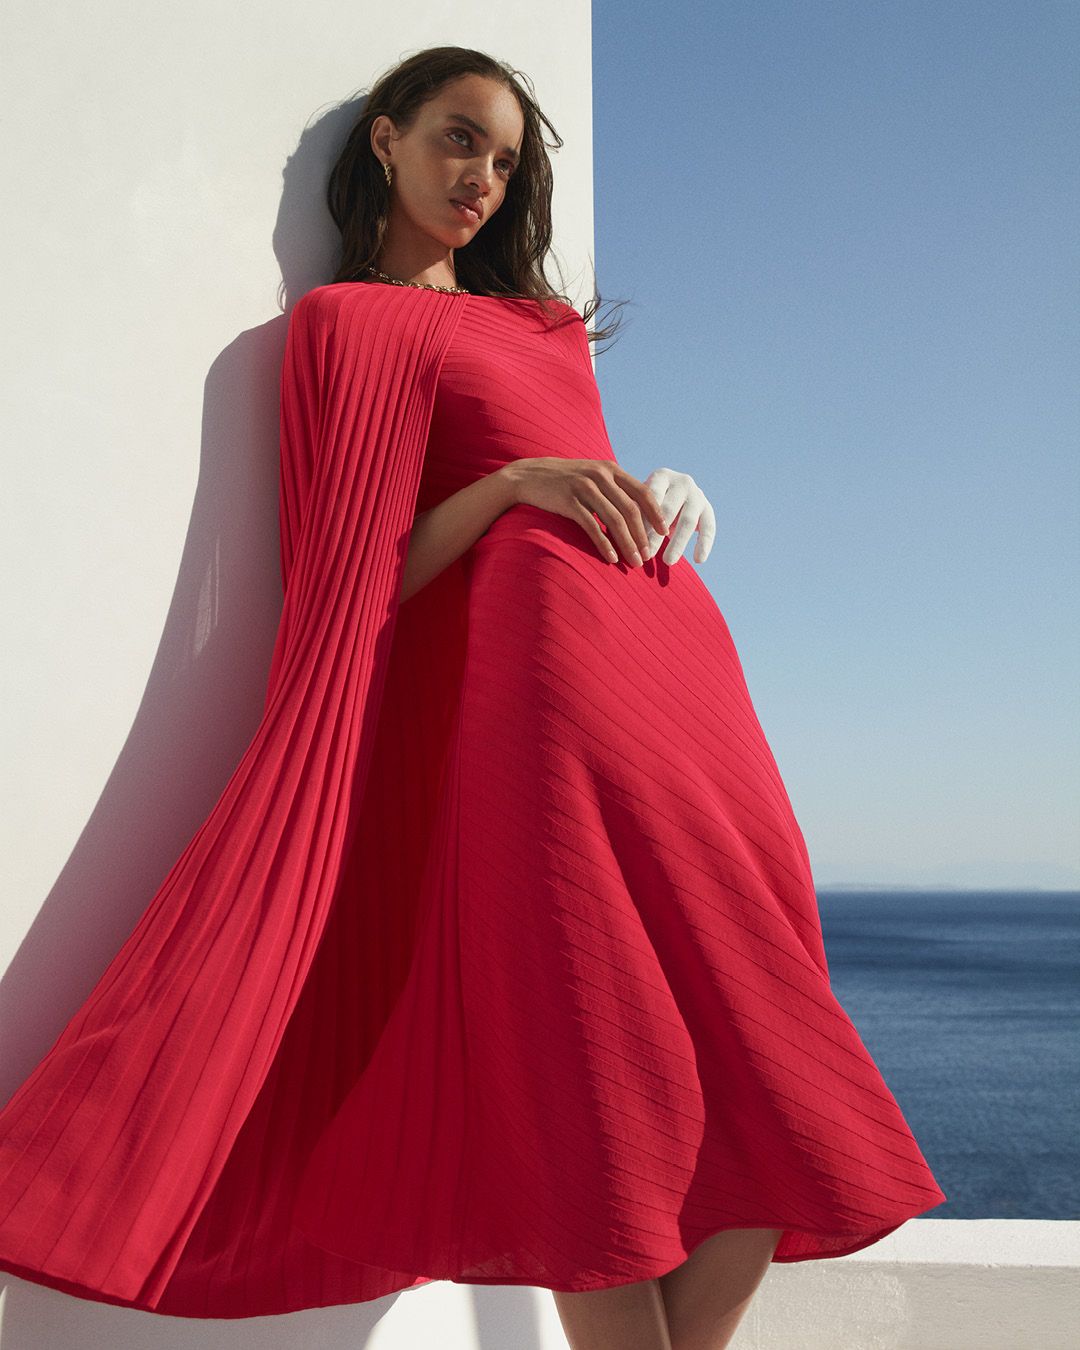 Model leaning against a wall wearing a bright pink dress with the ocean in the background